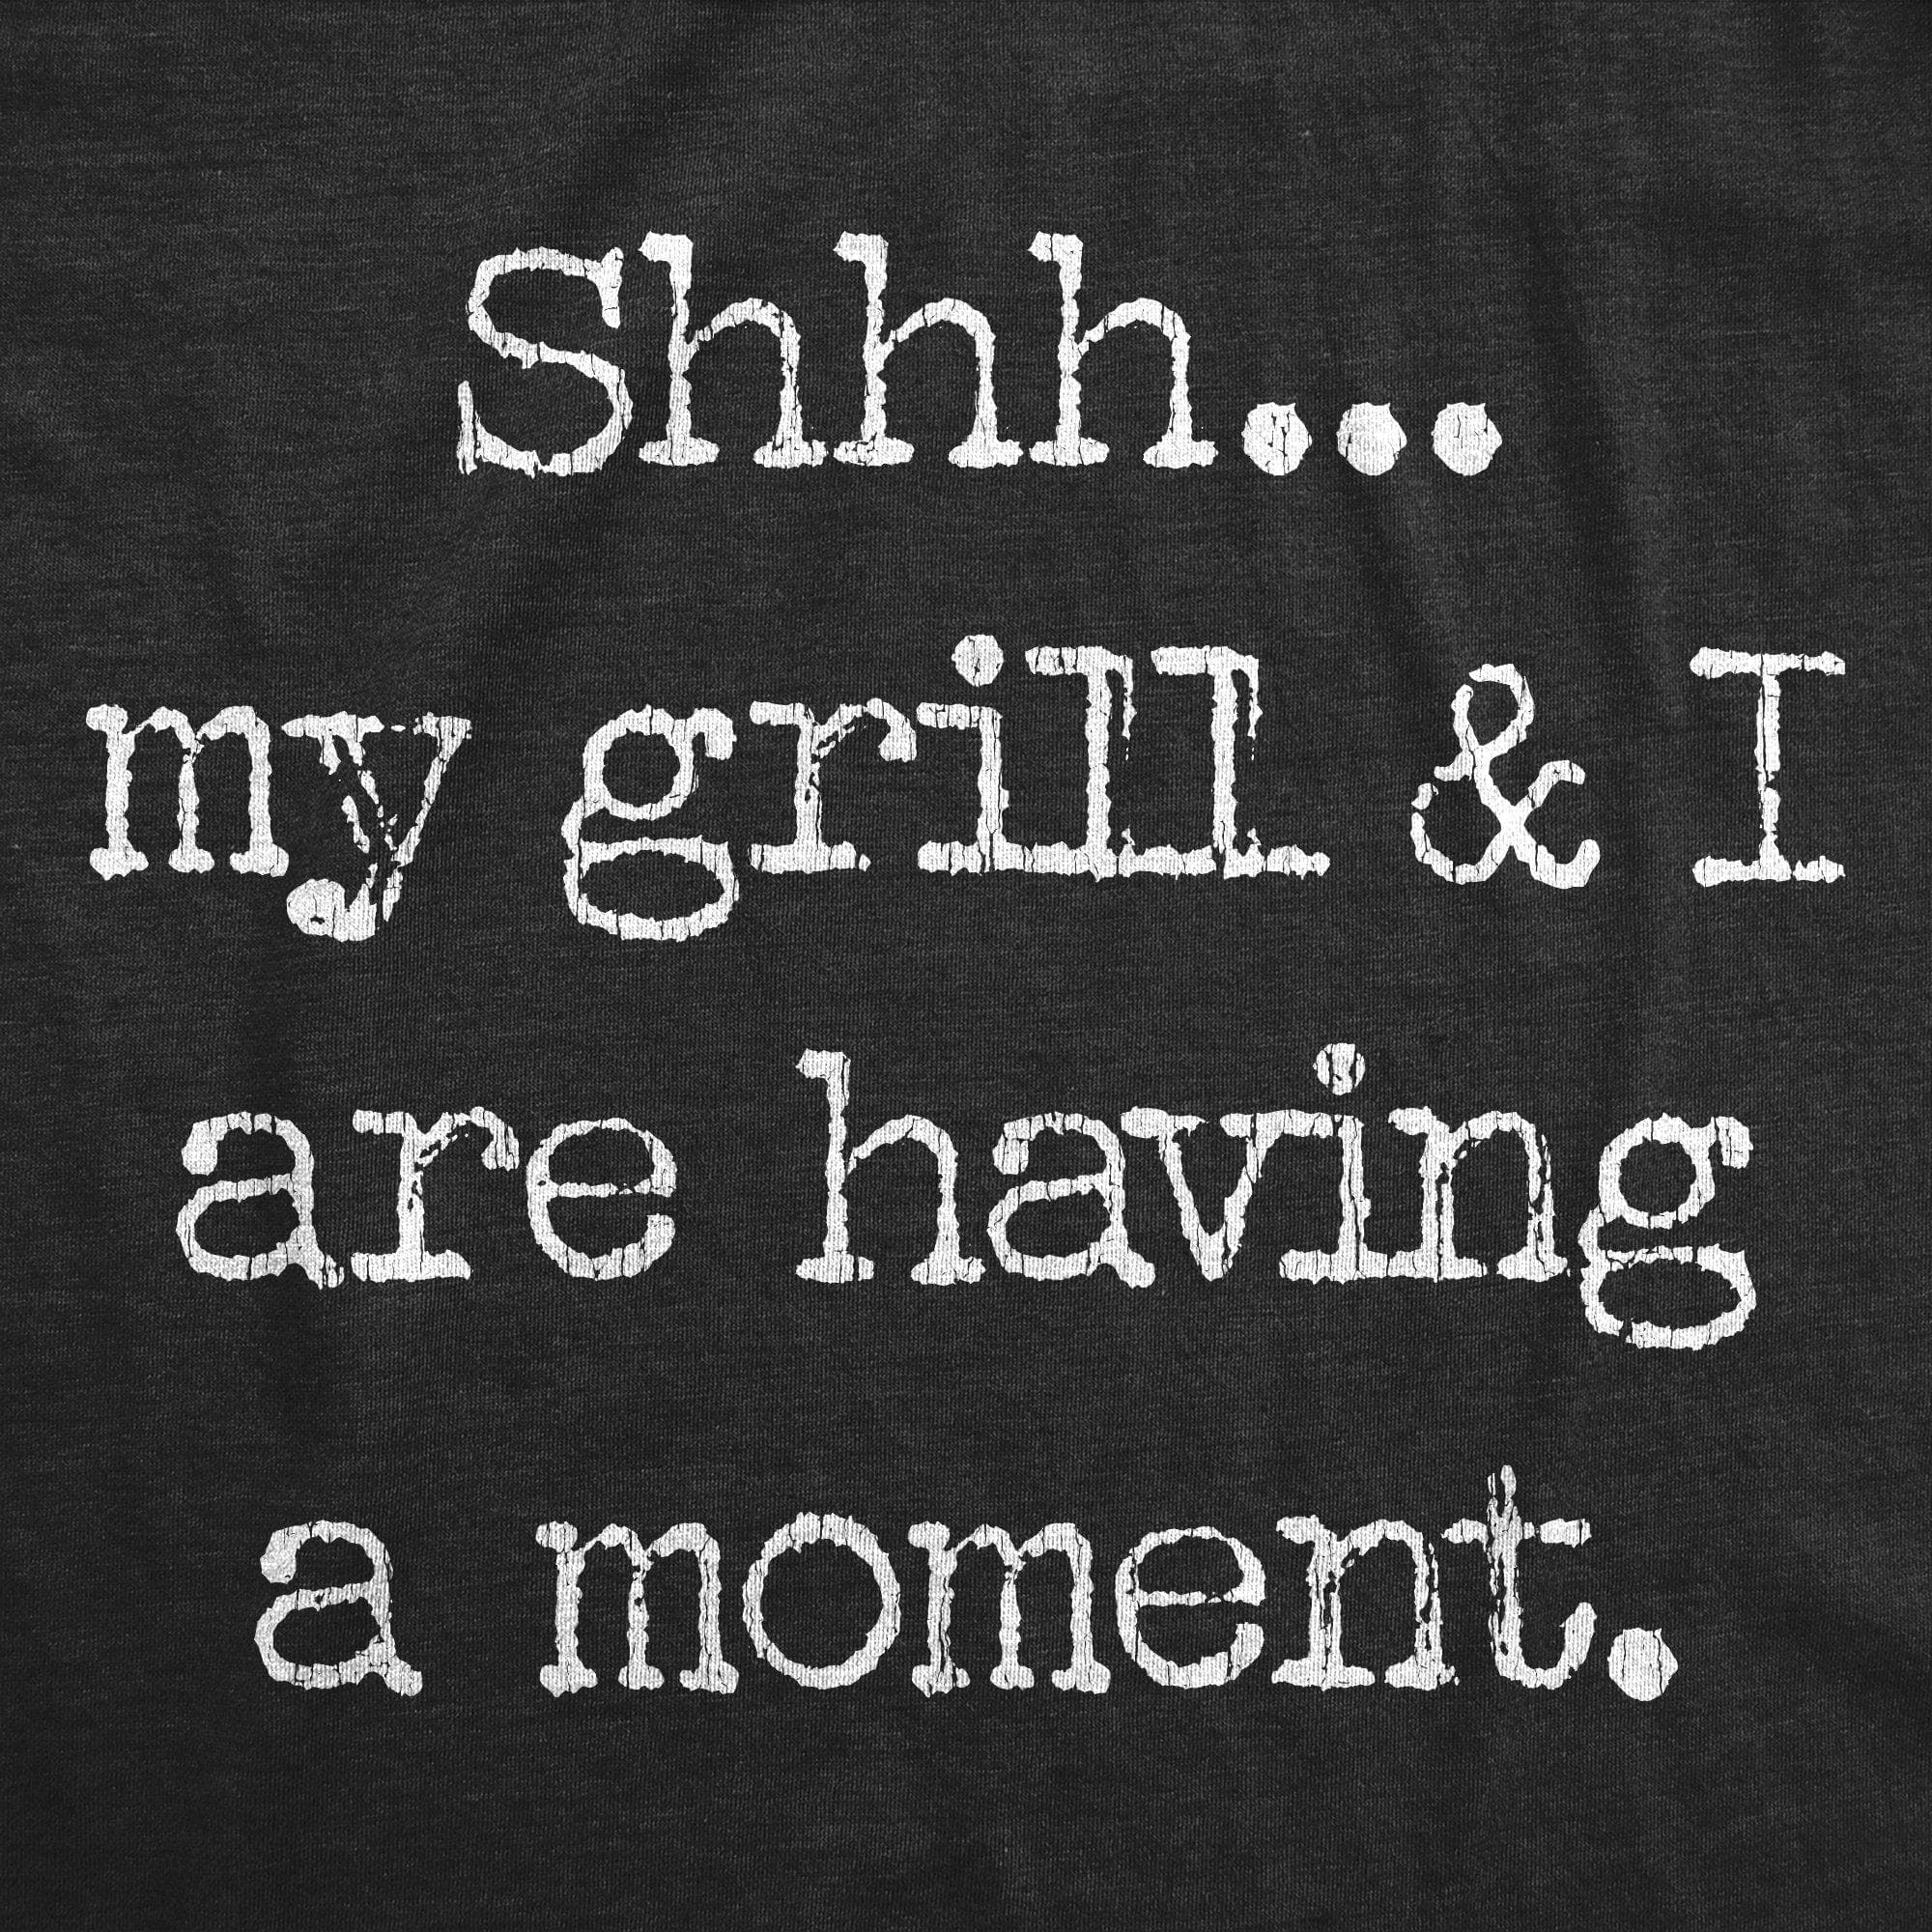 Shhh… My Grill And I Are Having A Moment Men's Tshirt - Crazy Dog T-Shirts